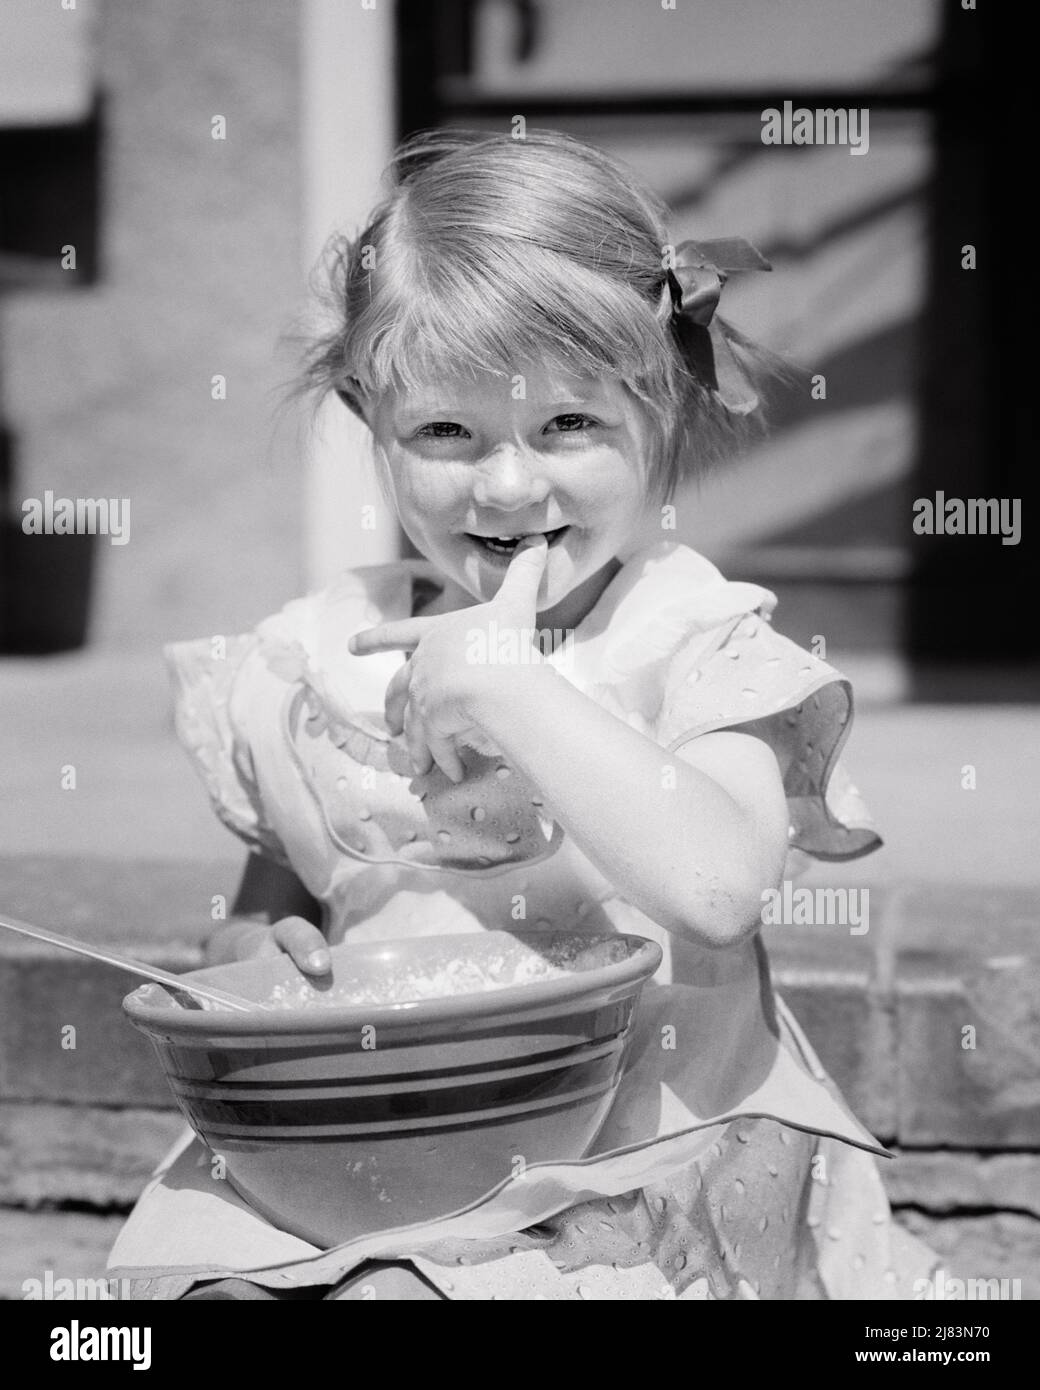 1930s SMILING LITTLE GIRL LOOKING AT CAMERA WITH BIG BOWL OF WHIPPED CREAM IN HER LAP LICKING HER FINGERS AND THUMB ON HER LIPS - j5915 HAR001 HARS WINNING THUMB HEALTHINESS HOME LIFE COPY SPACE HALF-LENGTH CHIN B&W LAP EYE CONTACT LICKING HAPPINESS CHEERFUL DISCOVERY AND IN ON SMILES JOYFUL PLEASANT AGREEABLE CHARMING JUVENILES LOVABLE PLEASING WHIPPED CREAM ADORABLE APPEALING BLACK AND WHITE CAUCASIAN ETHNICITY HAR001 OLD FASHIONED Stock Photo